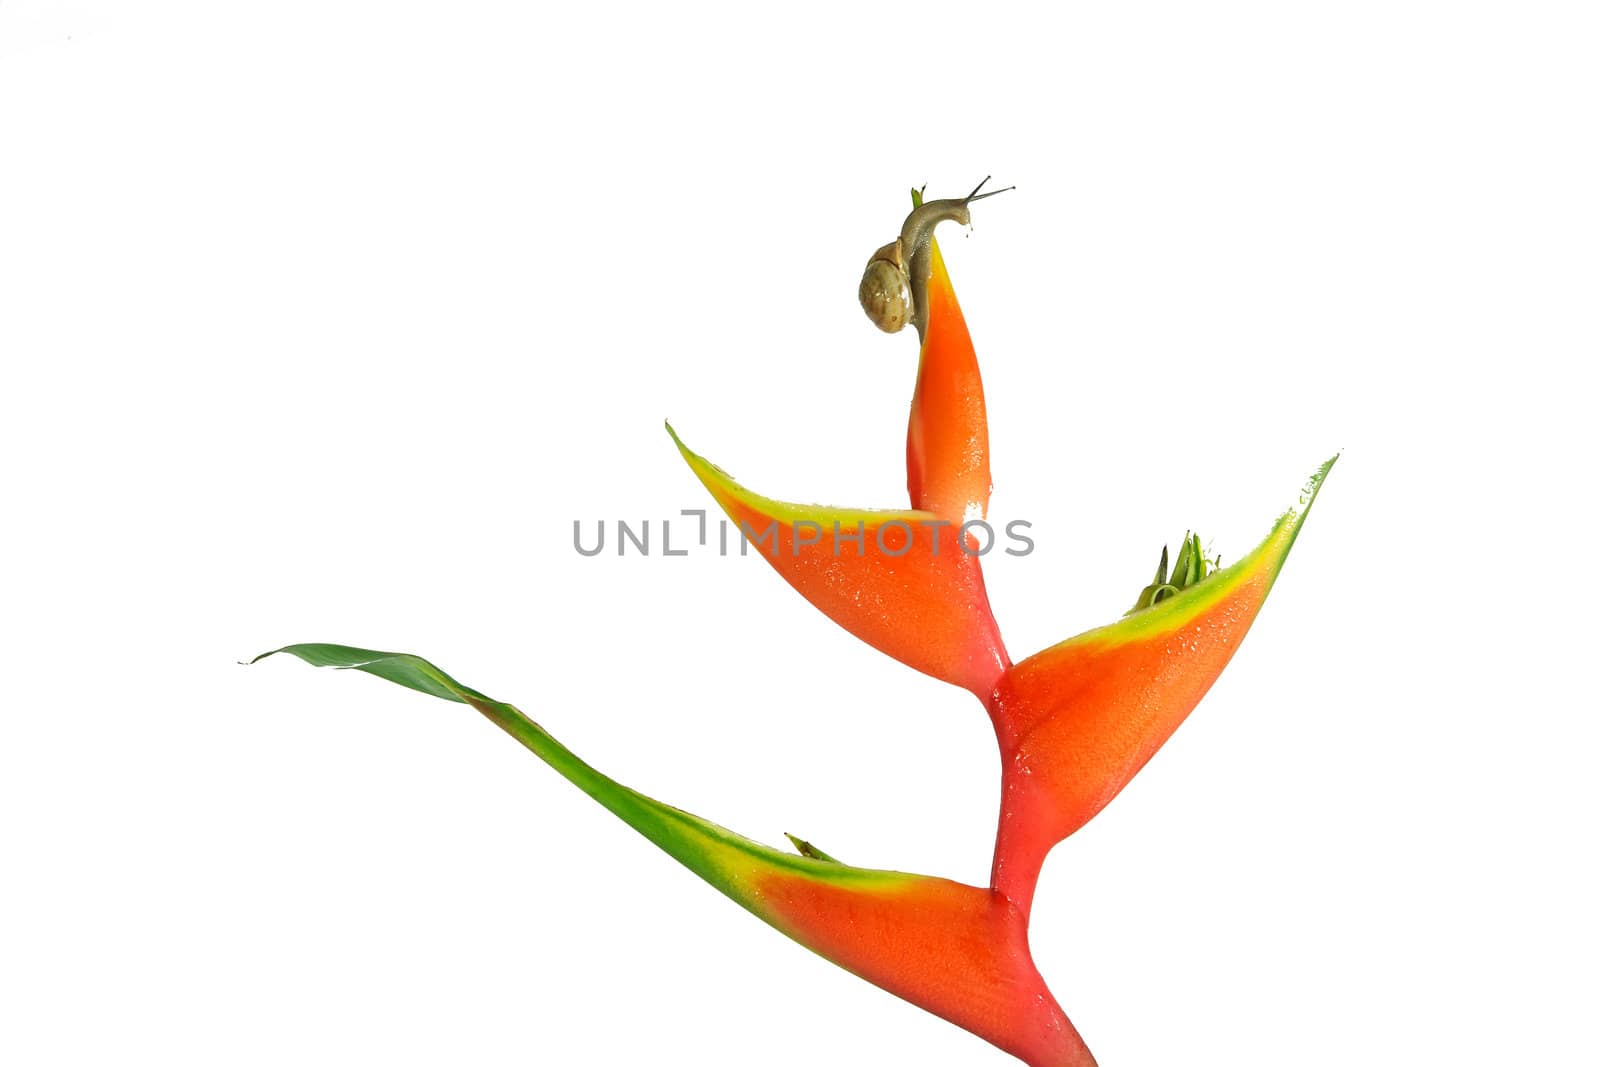 Heliconia by xfdly5